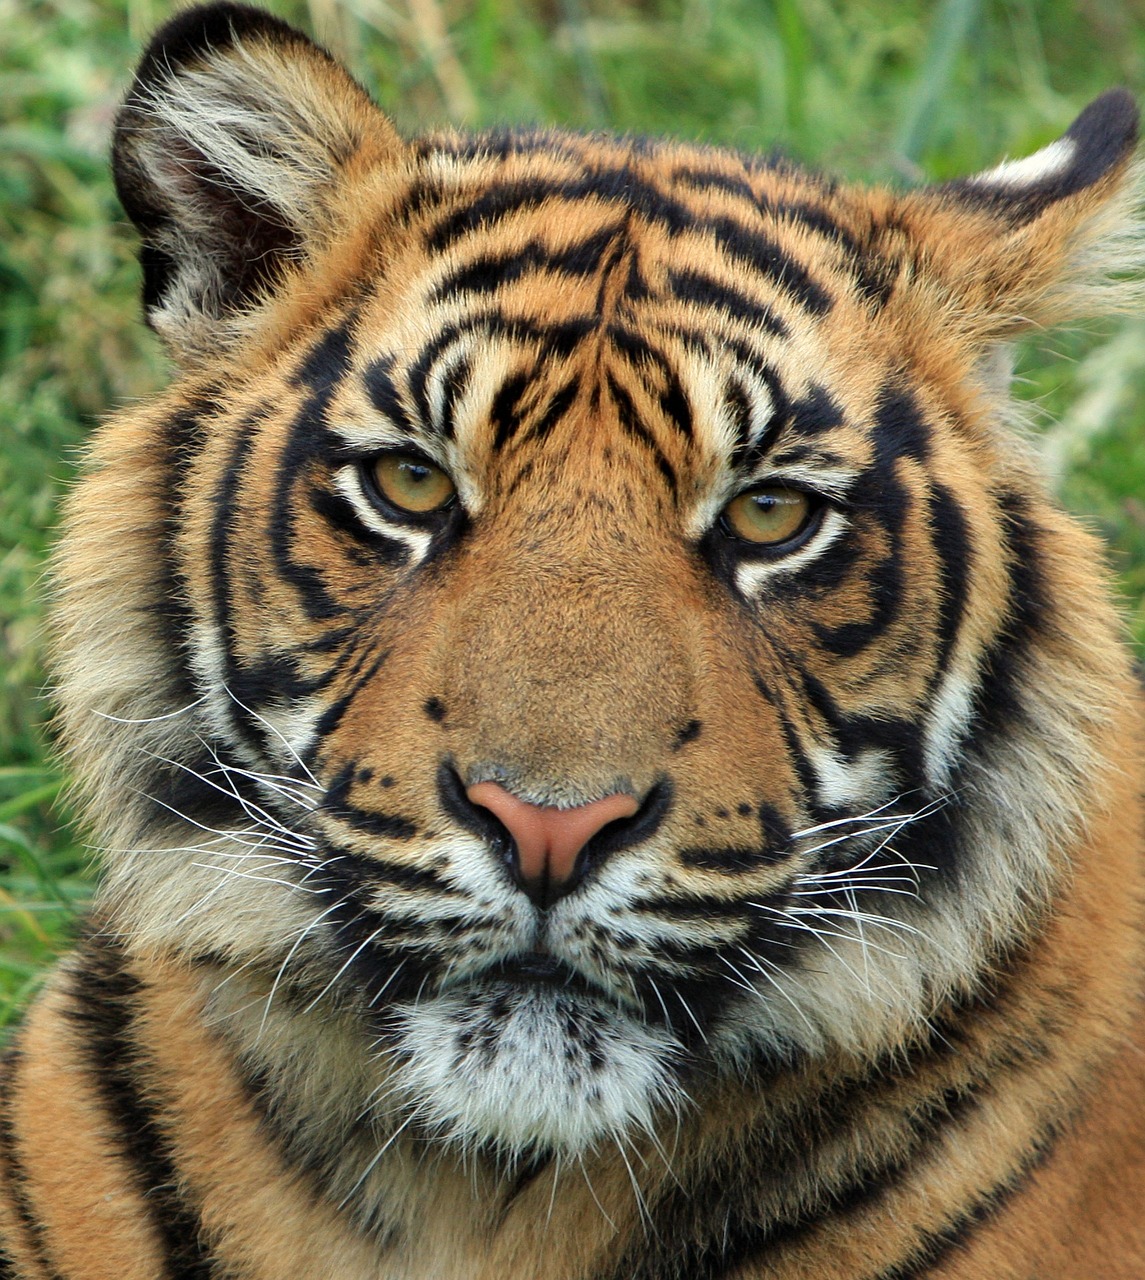 a close up of a tiger's face in the grass, by Juergen von Huendeberg, flickr, sumatraism, handsome girl, an afghan male type, close up front view, by greg rutkowski